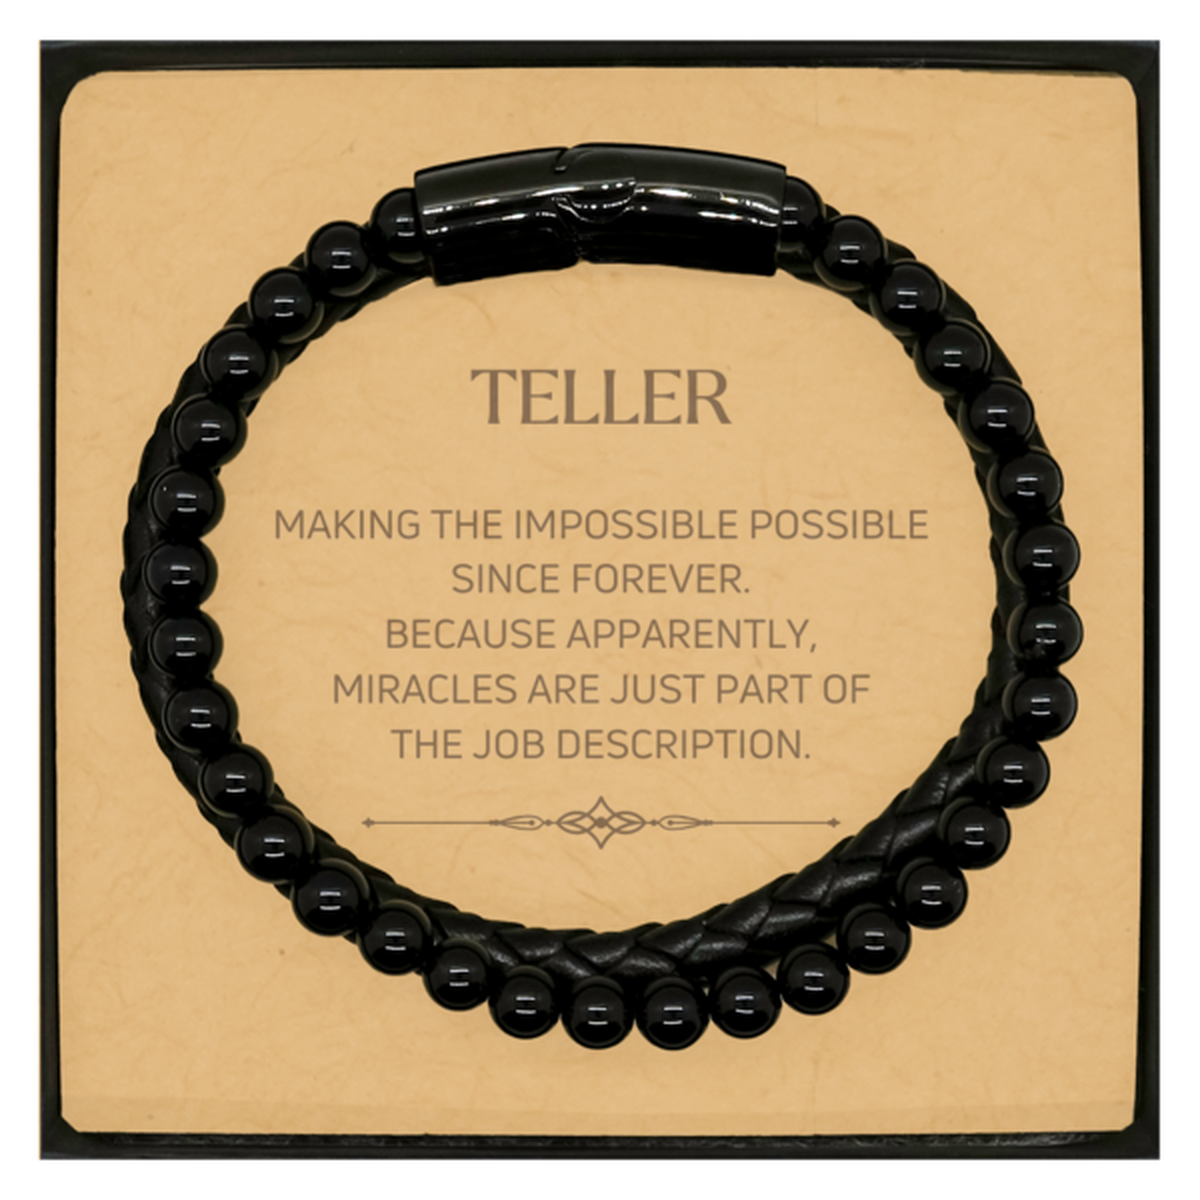 Funny Teller Gifts, Miracles are just part of the job description, Inspirational Birthday Christmas Stone Leather Bracelets For Teller, Men, Women, Coworkers, Friends, Boss